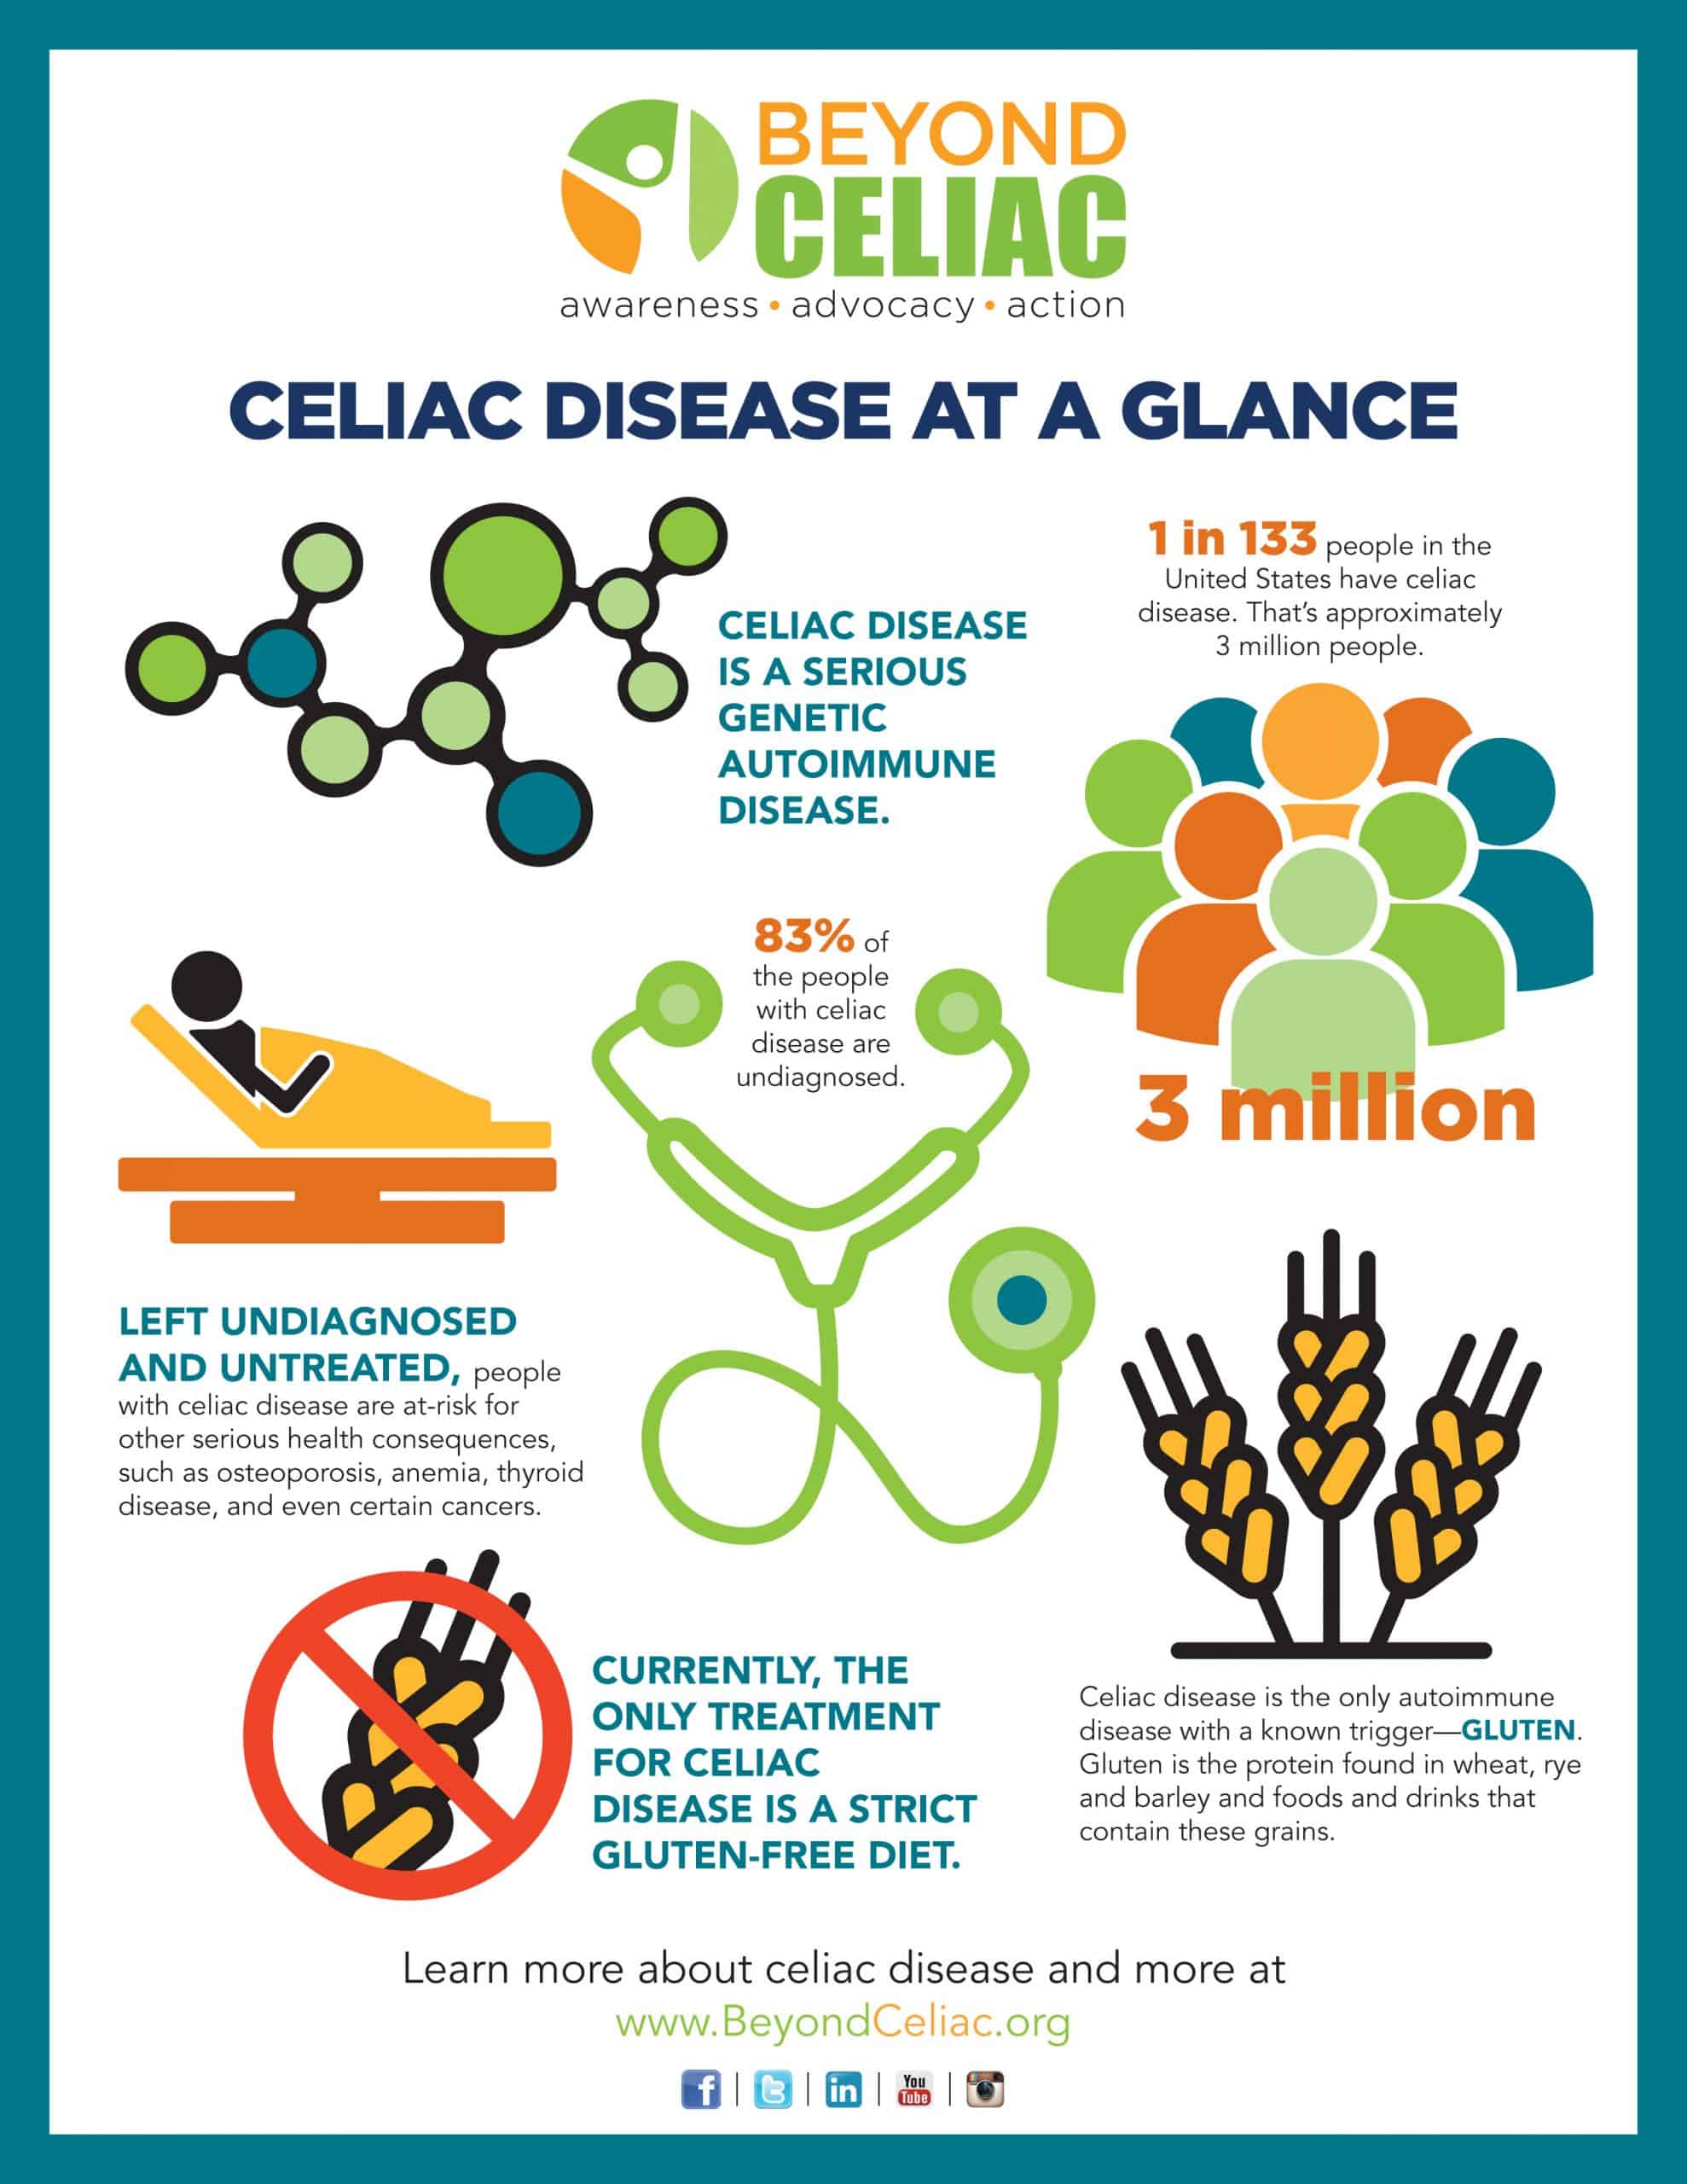 image shows stats of celiac disease and basic medical facts